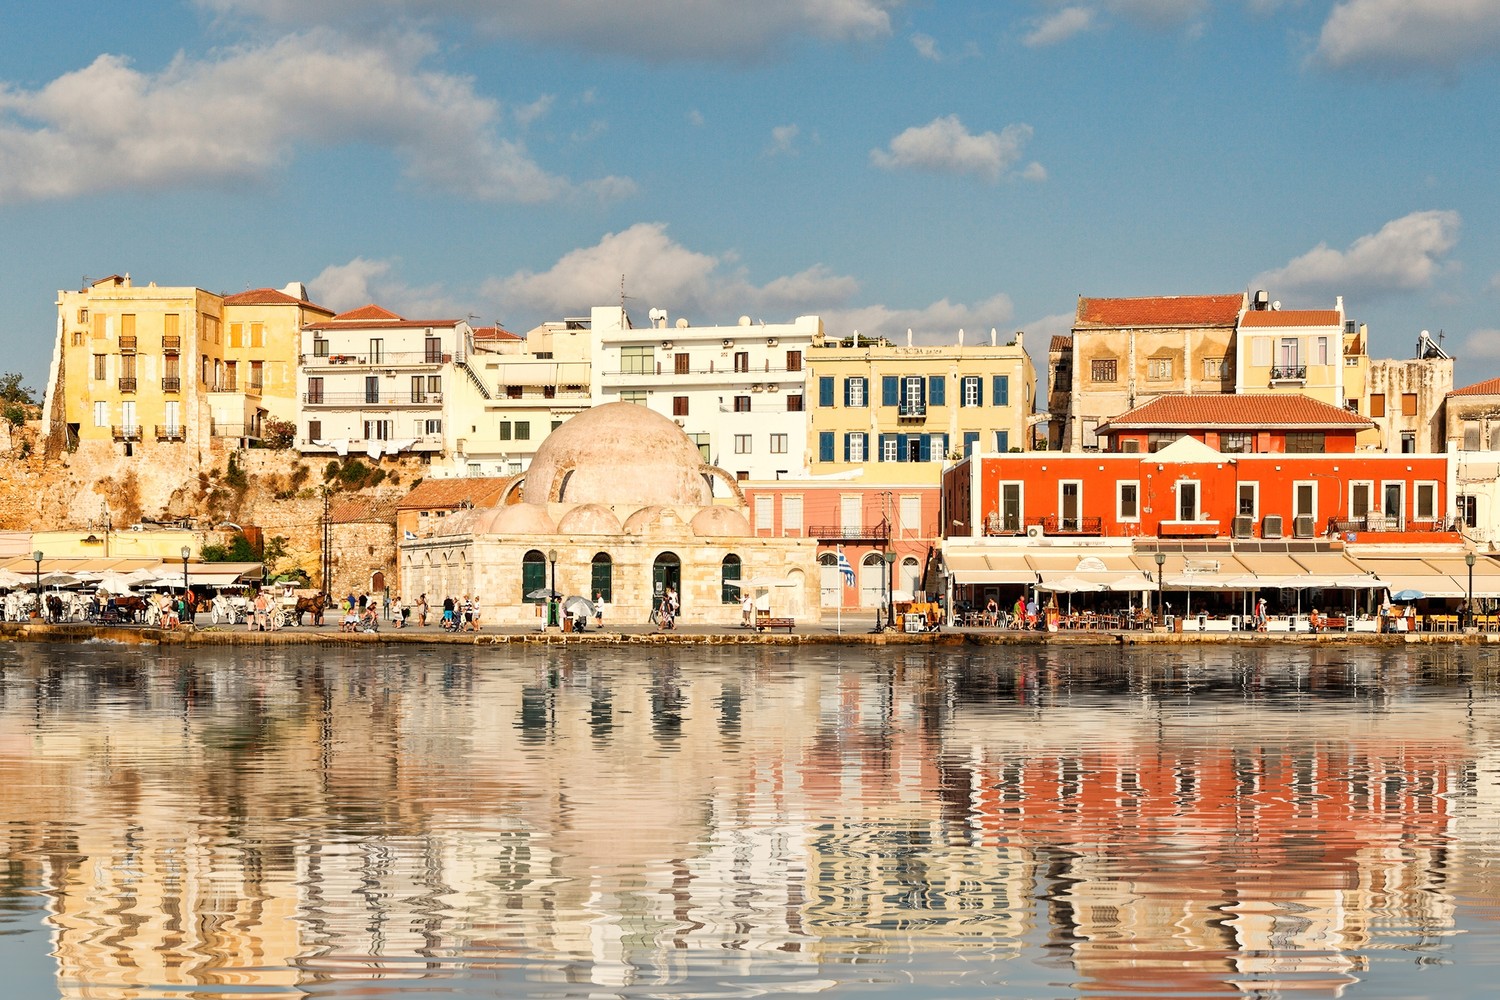 Explore Chania's Old Town
